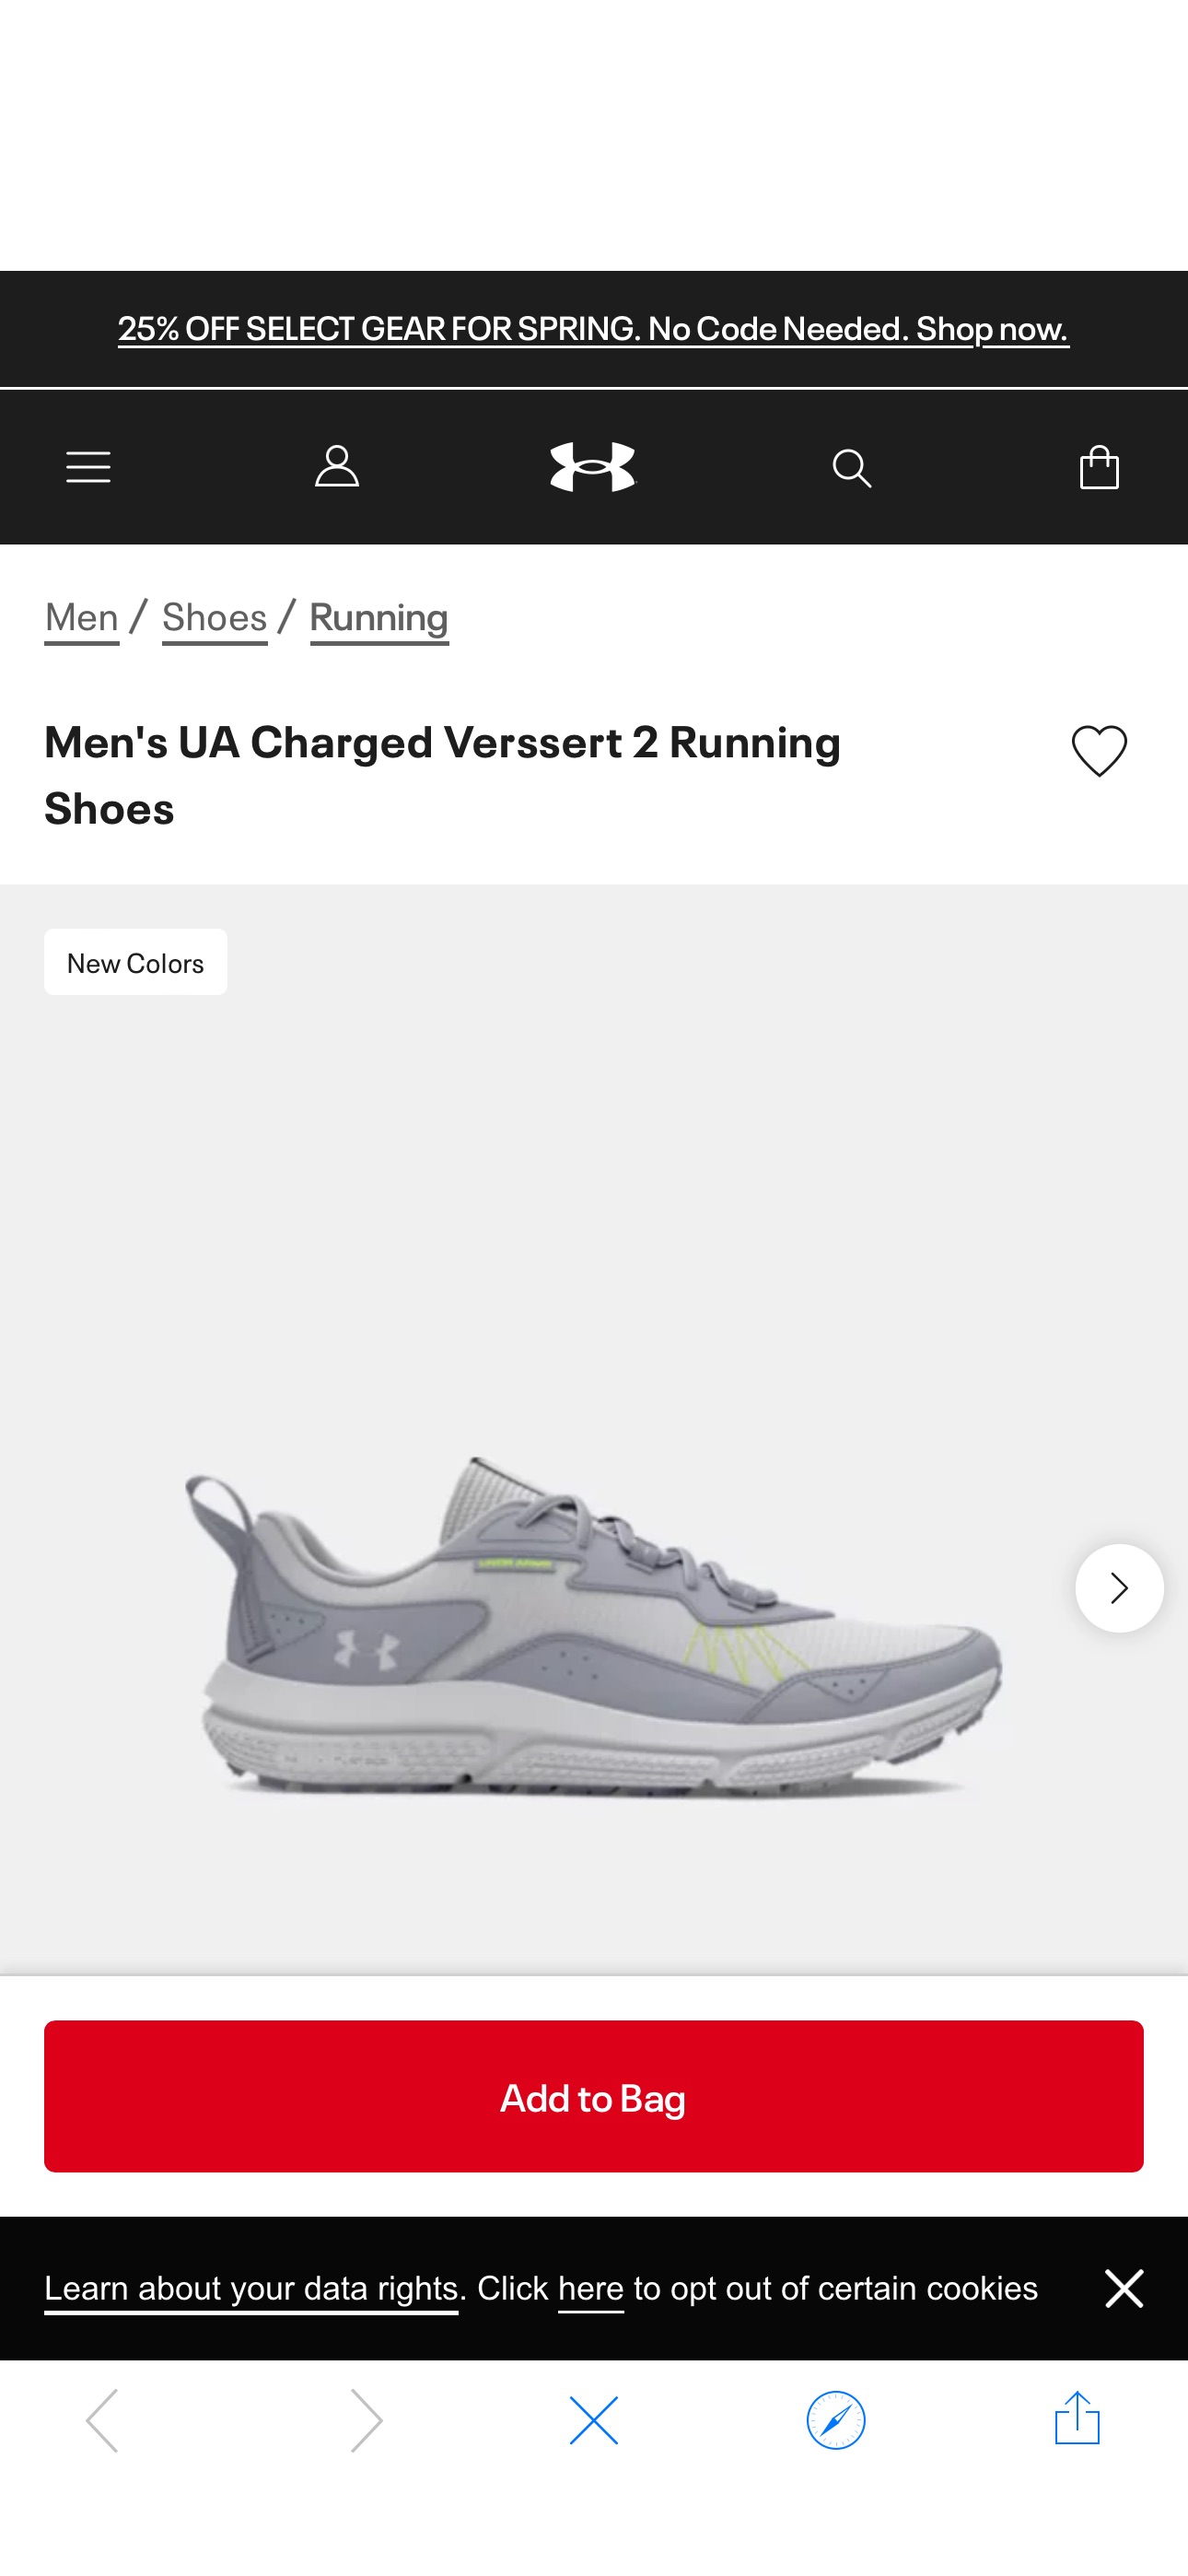 Men's UA Charged Verssert 2 Running Shoes | Under Armour Get this pair of men's UA Charged Verssert 2 to drop from $70 to $39.37 when you add code 30FORYOU at checkout